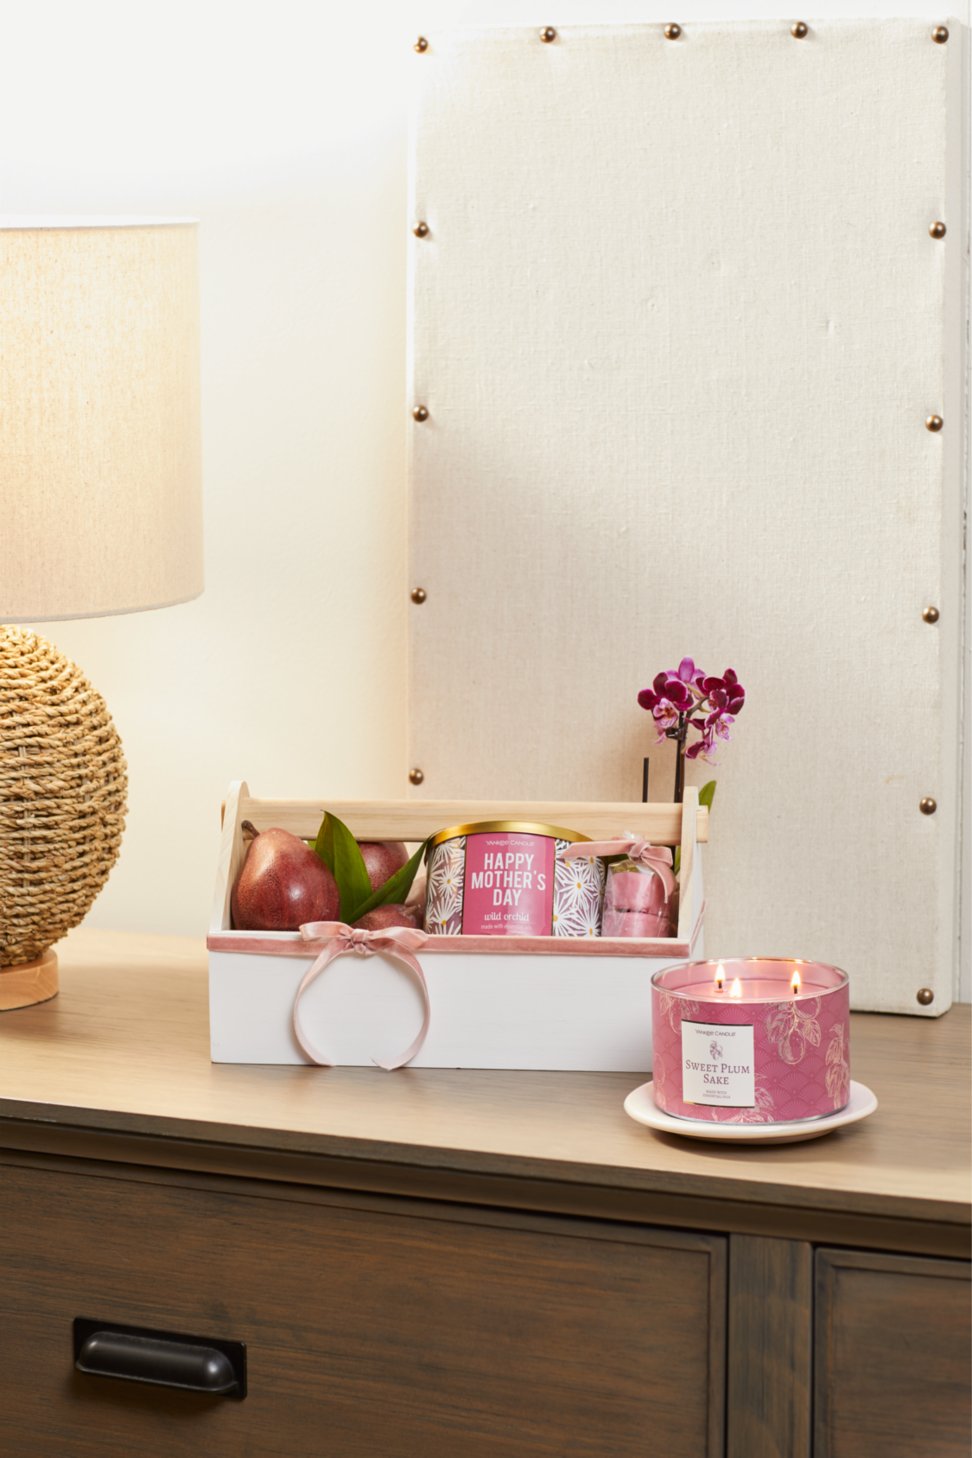 sweet plum sake three wick candle on dresser beside gift box featuring wild orchid happy mothers day three wick candle